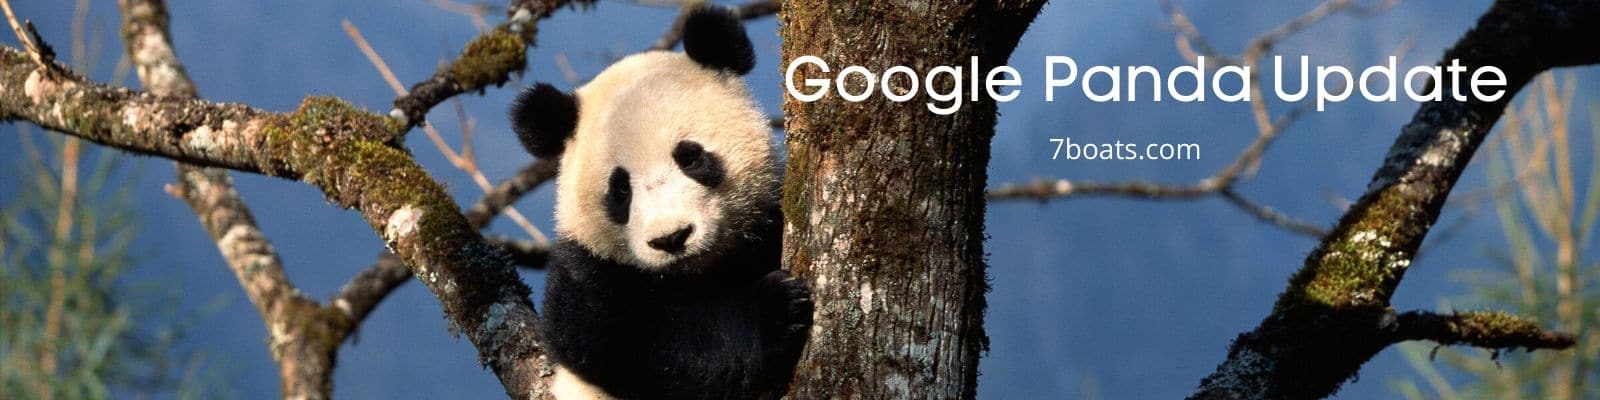 How to benefit from Google Panda Update and Penguin update